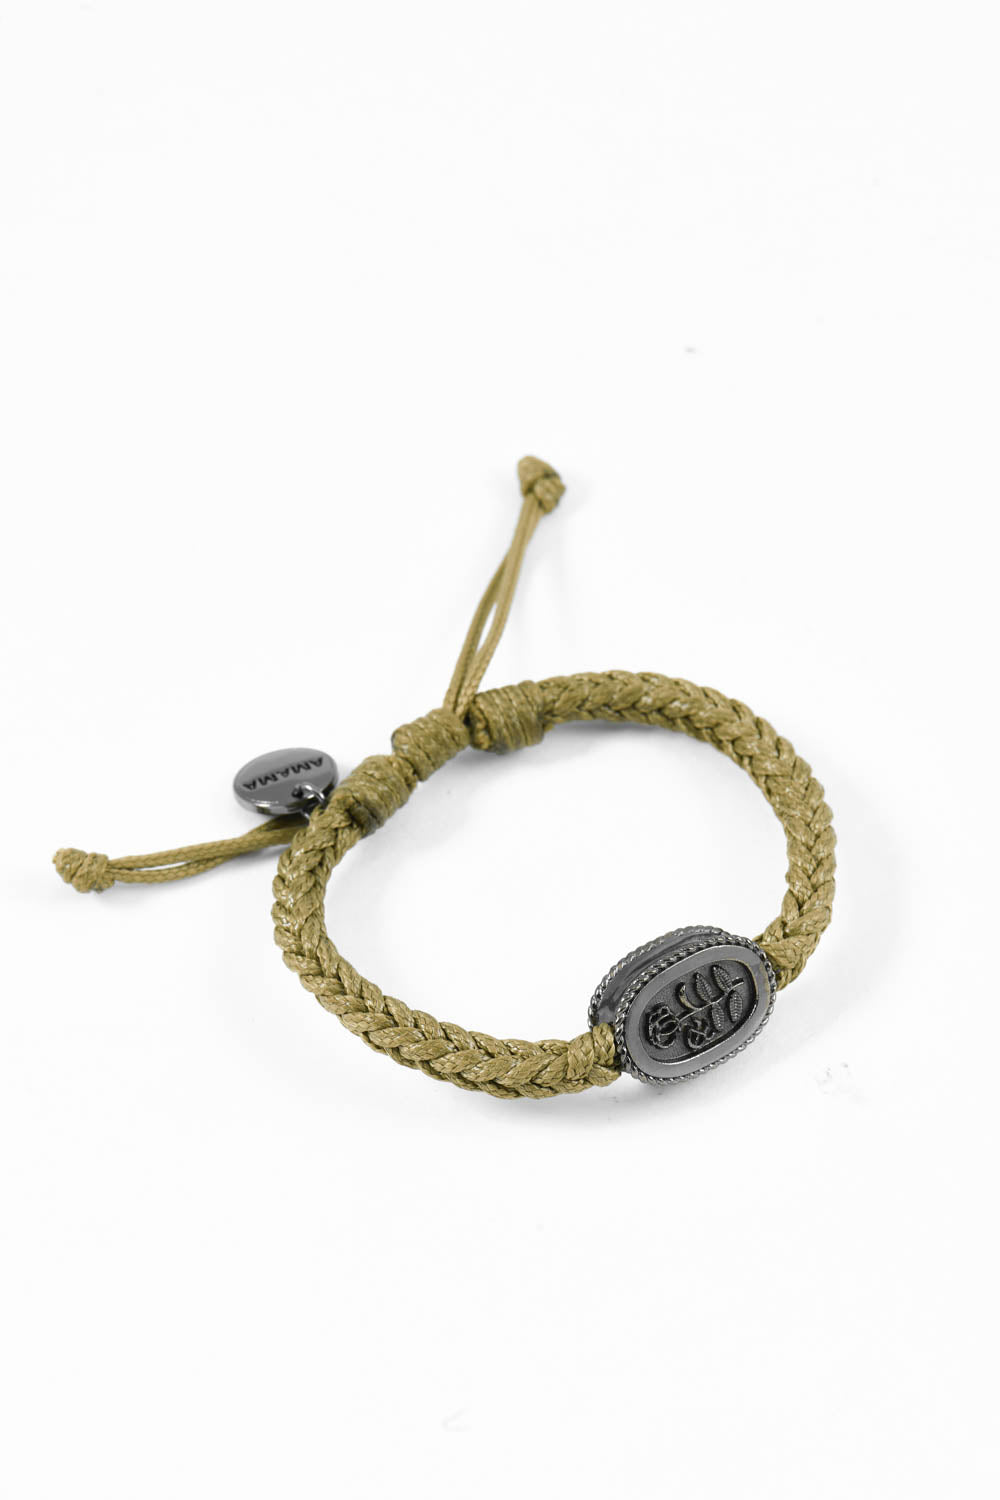 Amama,SubRosa Amulet Bracelet in Meadow Green